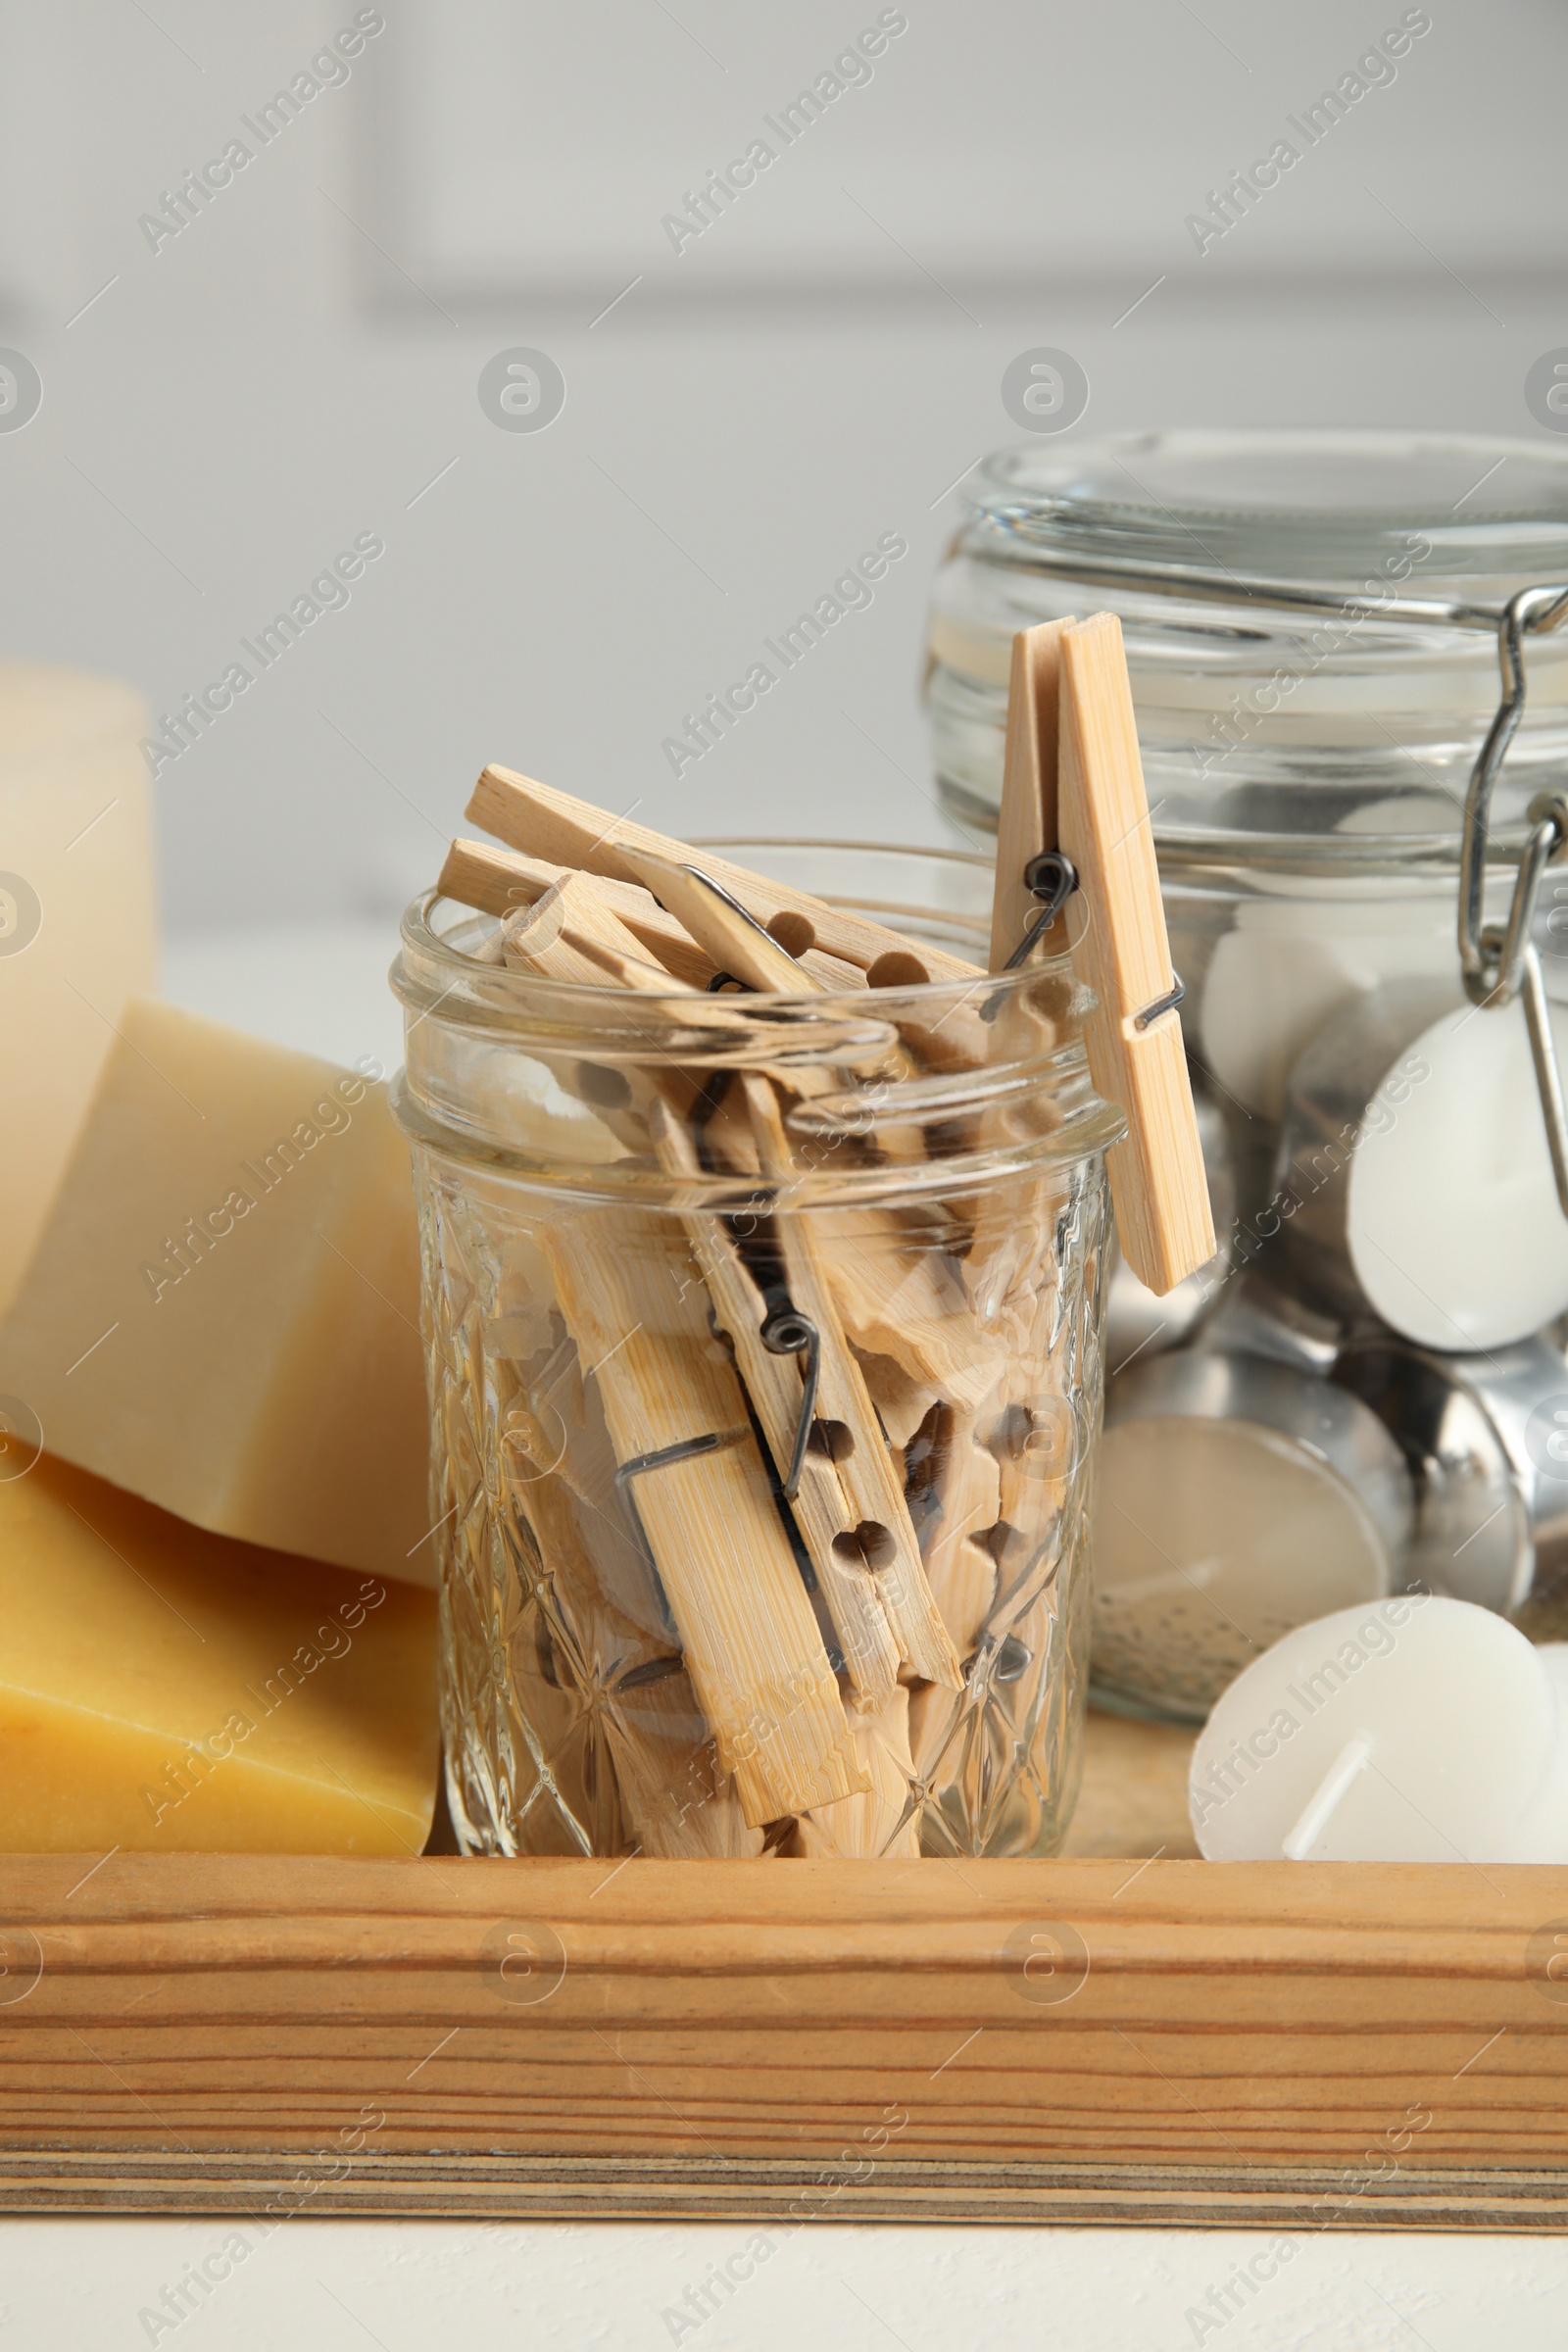 Photo of Many clothespins, candles and soap bars on wooden tray, closeup